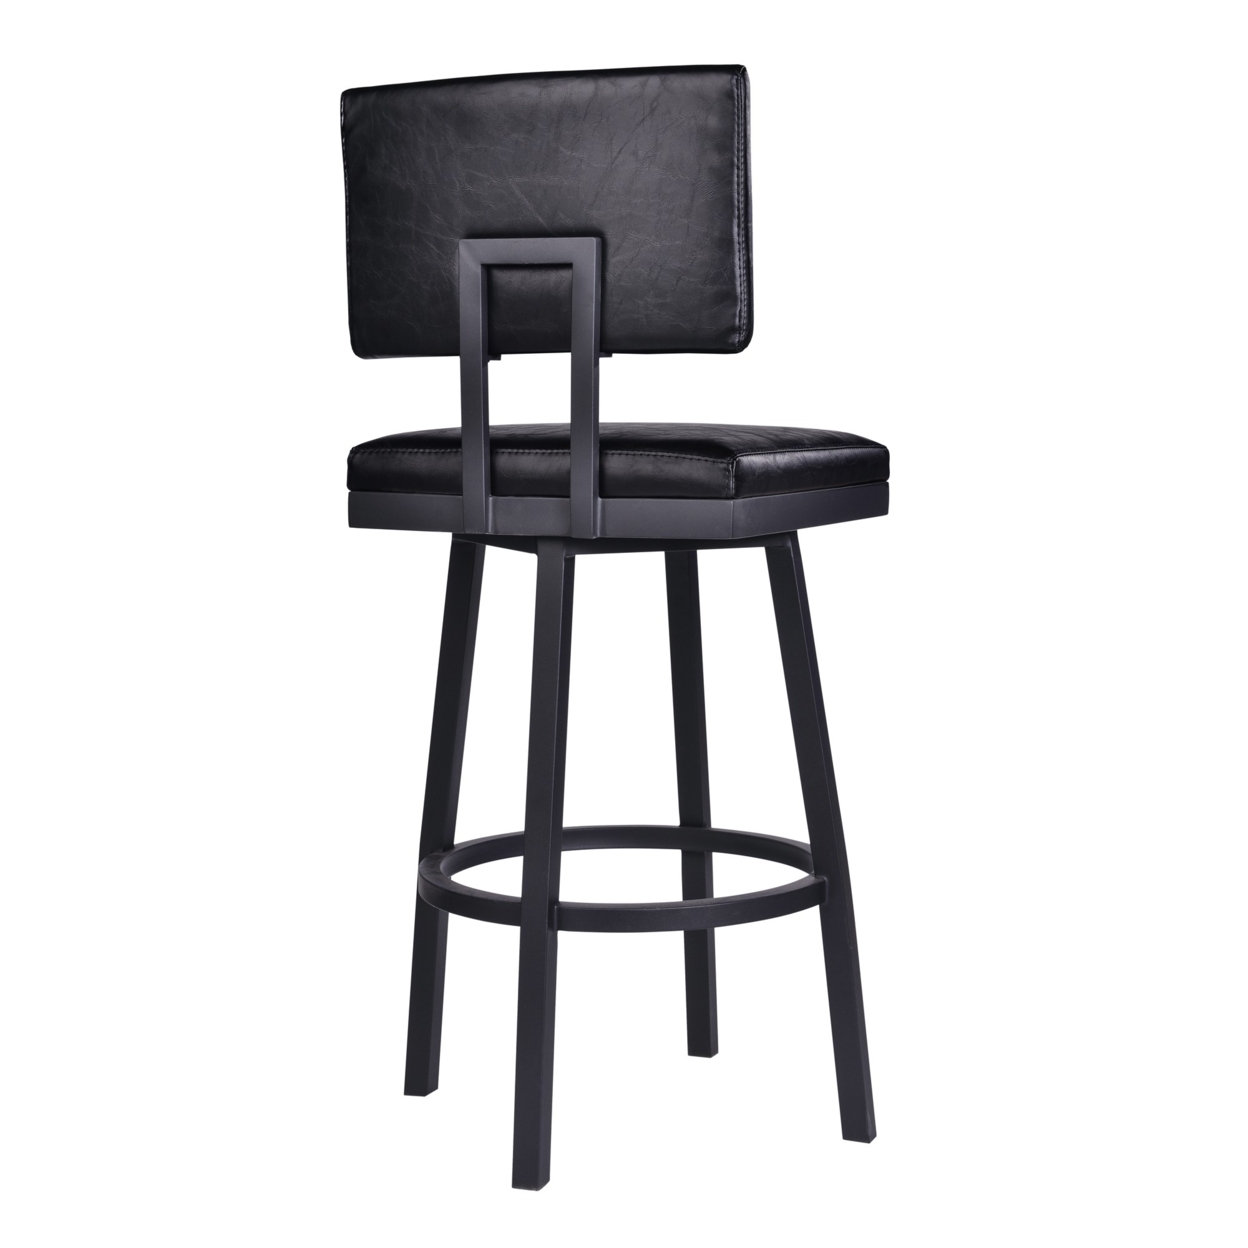 26 Lumbar Back Faux Leather Barstool With Stainless Steel Legs, Black- Saltoro Sherpi